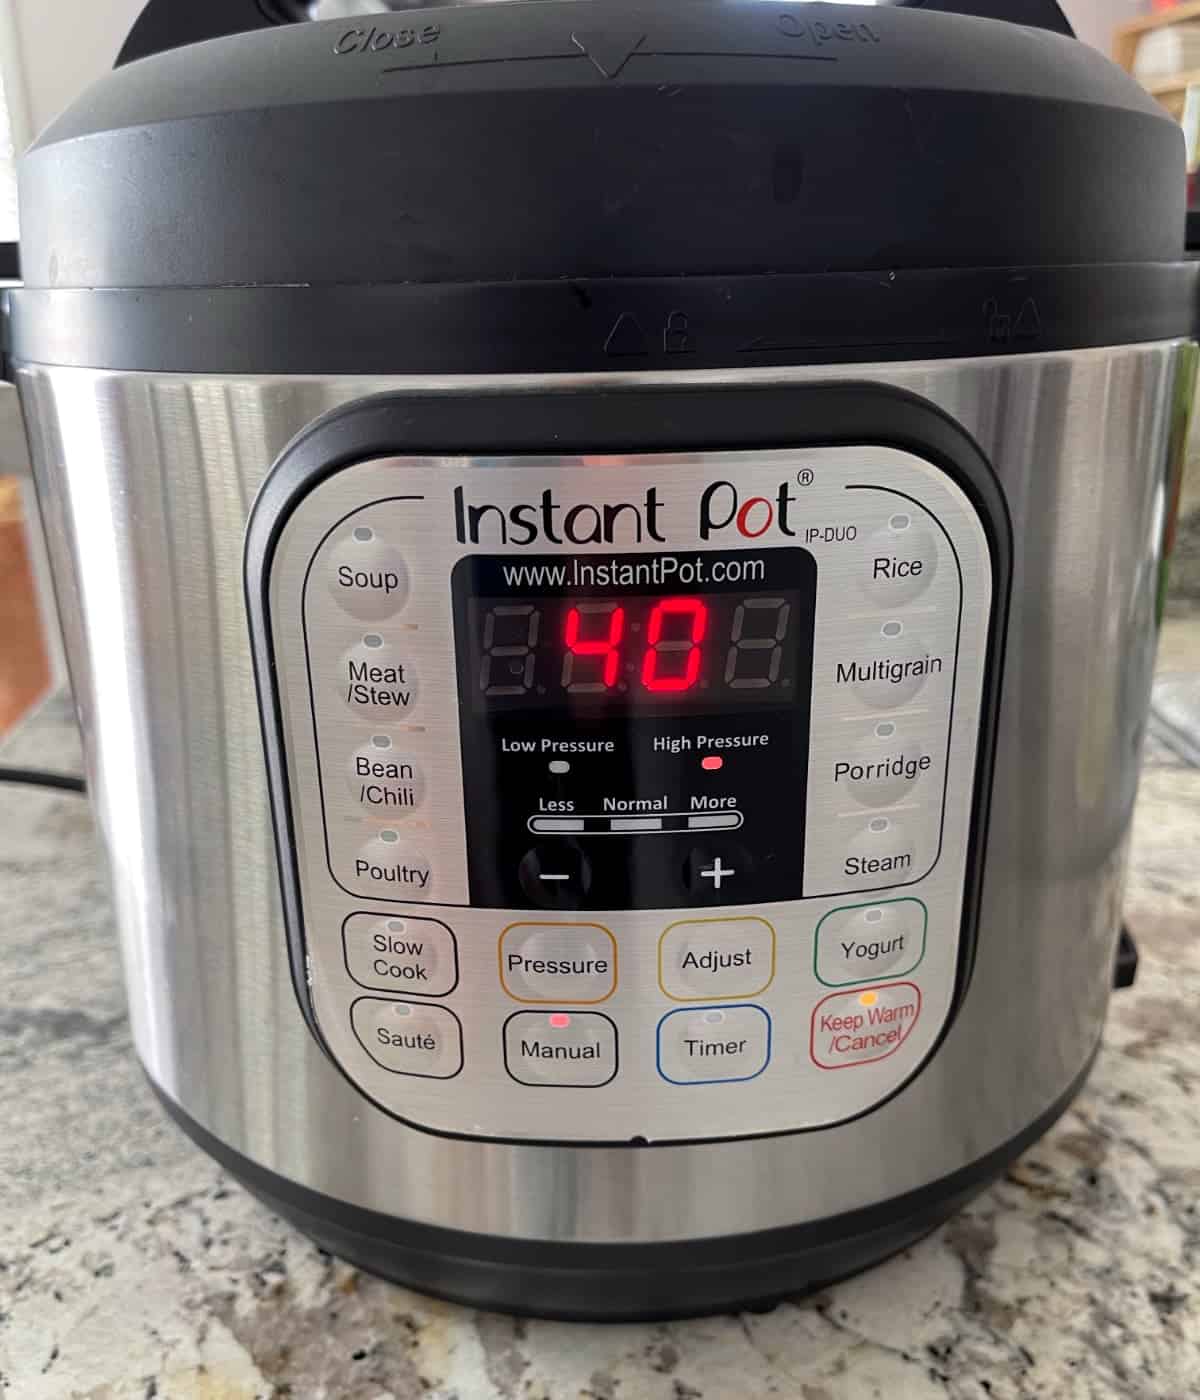 InstantPot set to 40 minutes on high pressure.